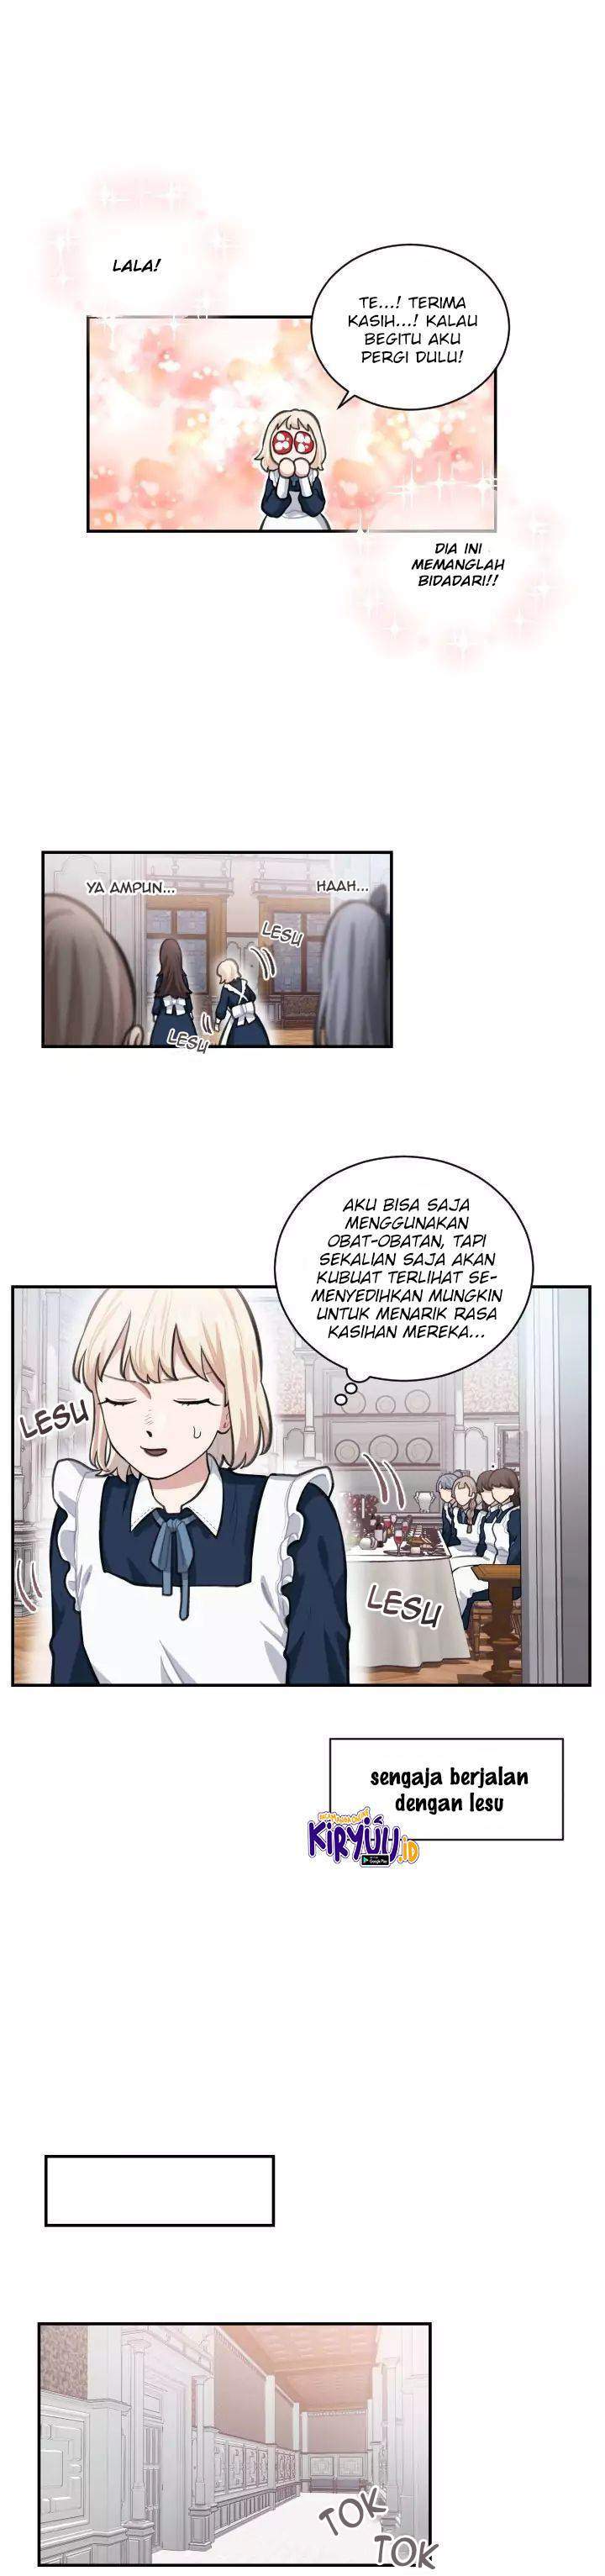 I Became a Maid in a TL Novel Chapter 5 21